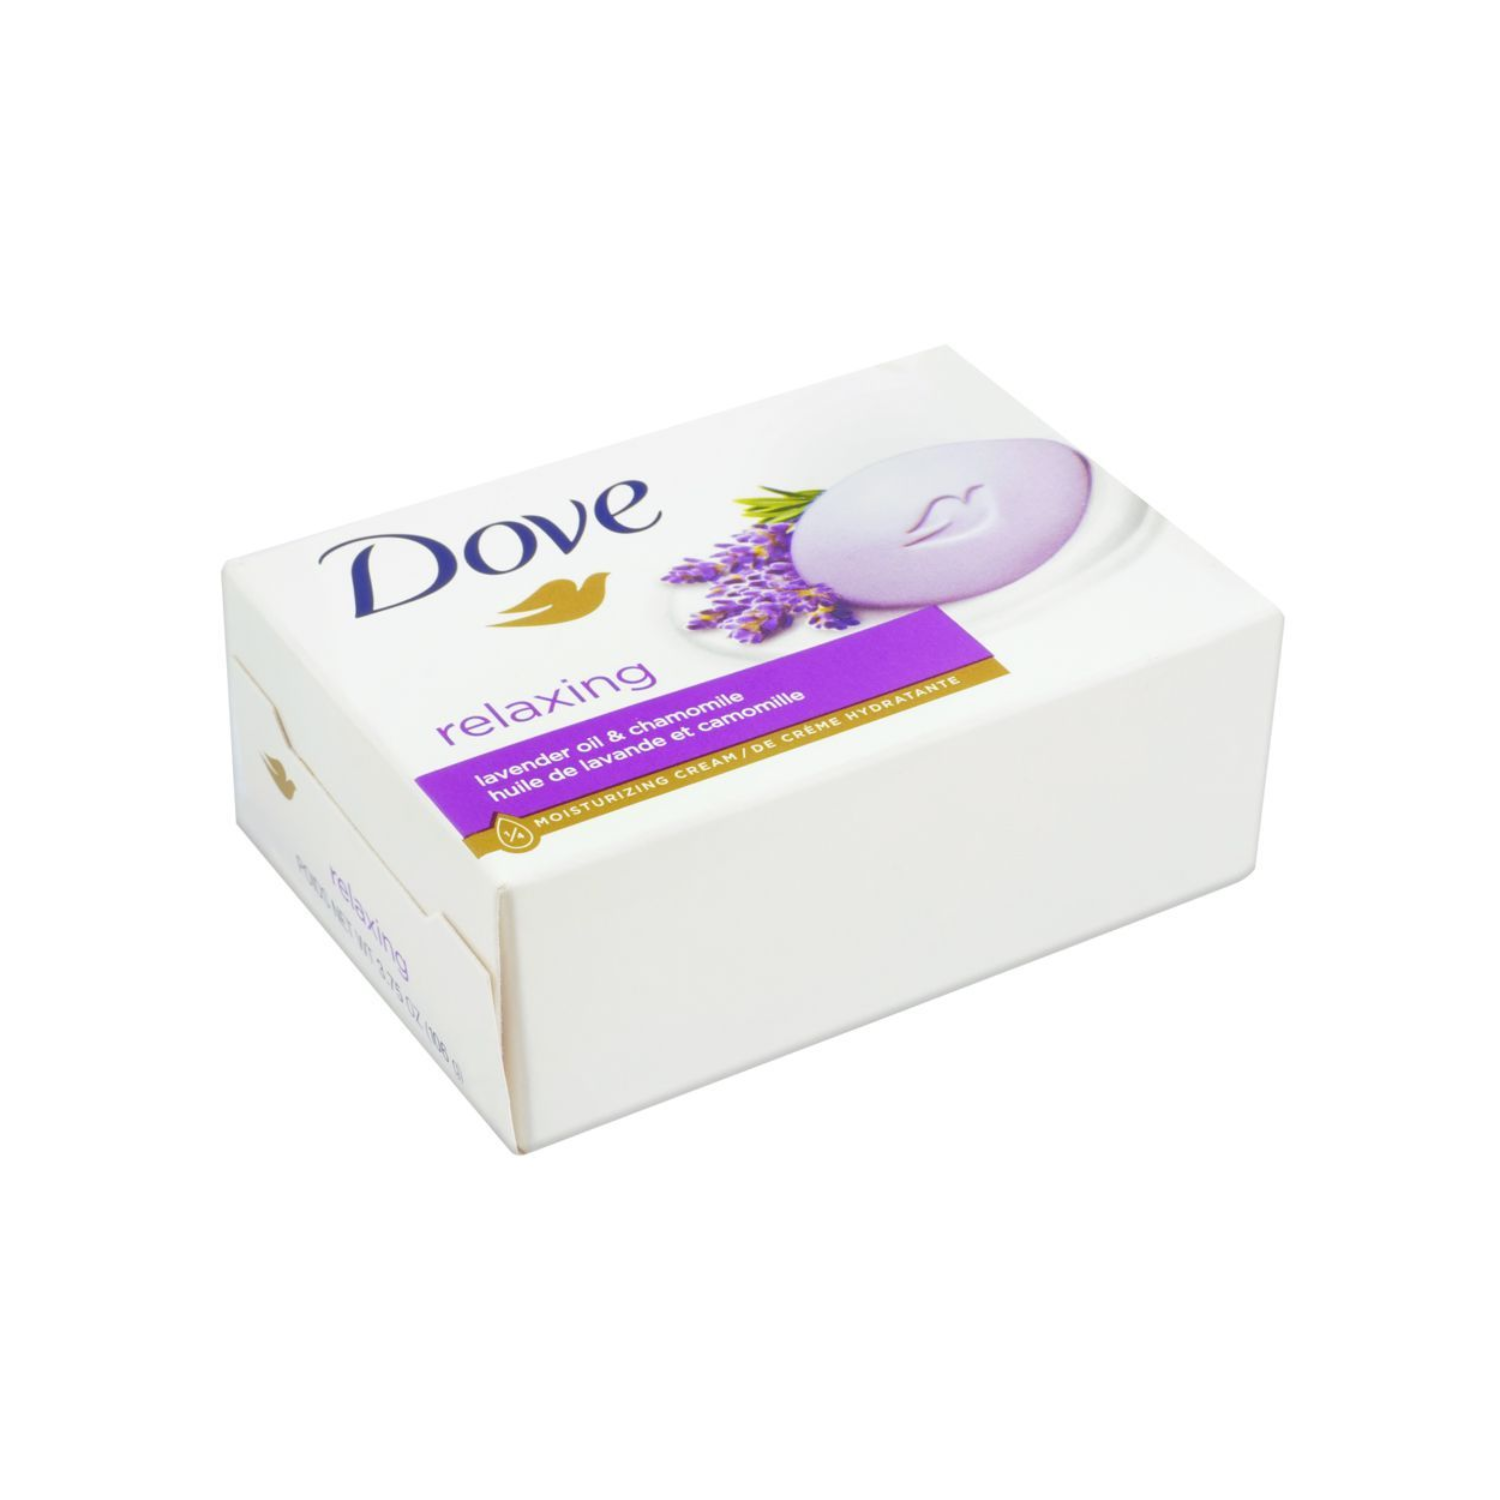 dove-relaxing-soap-canada-106g